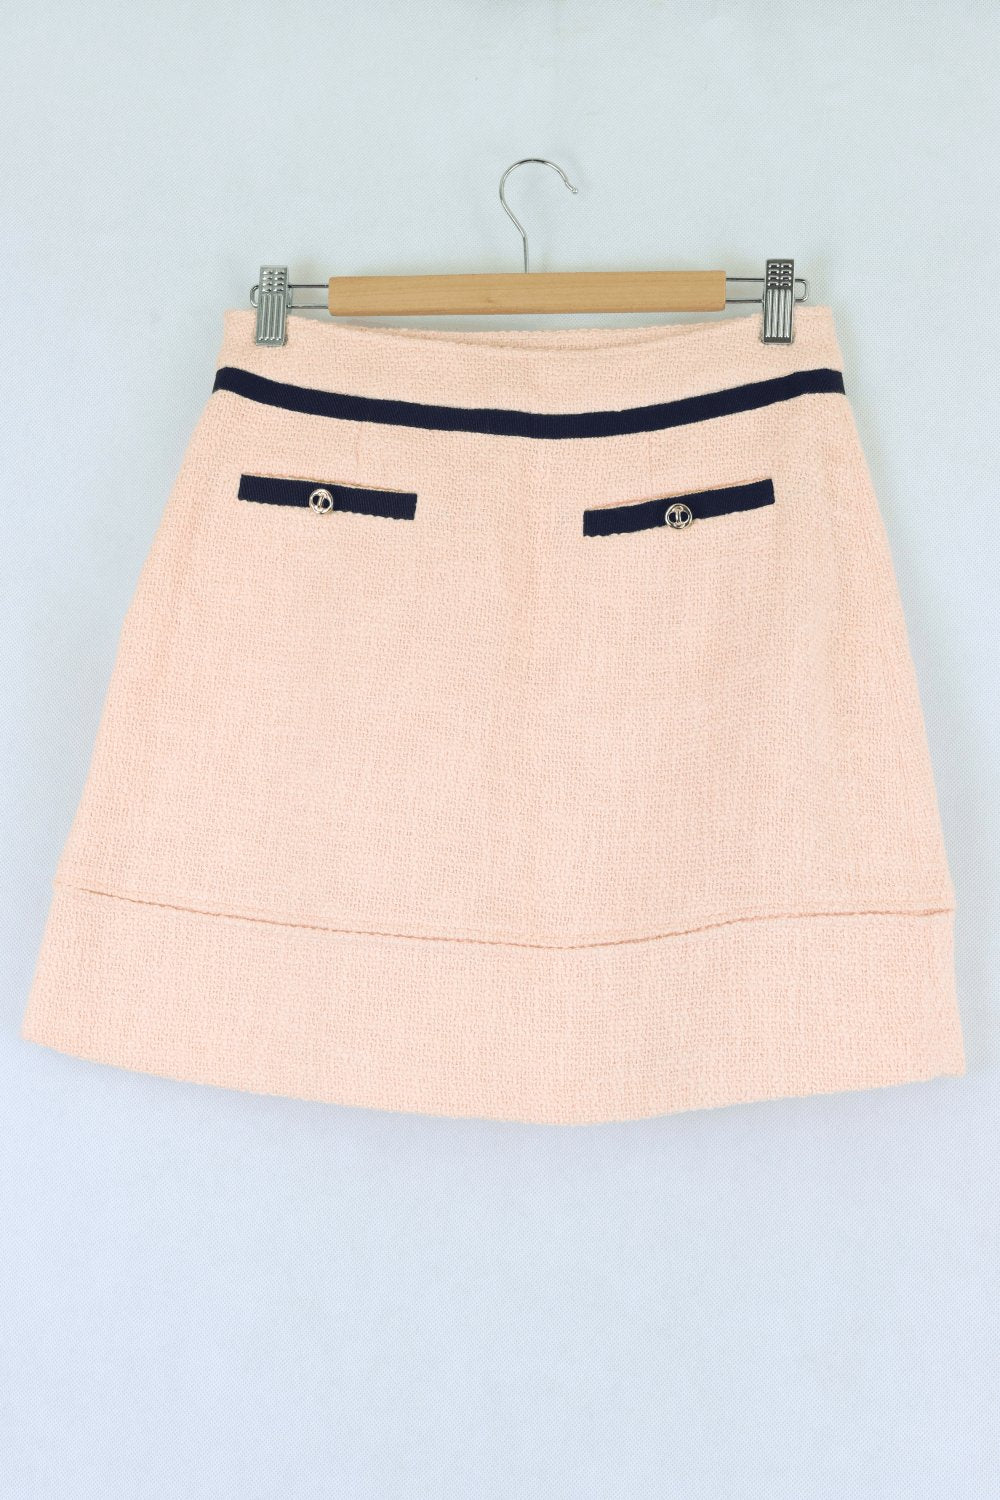 Max & Co Pink Skirt 10